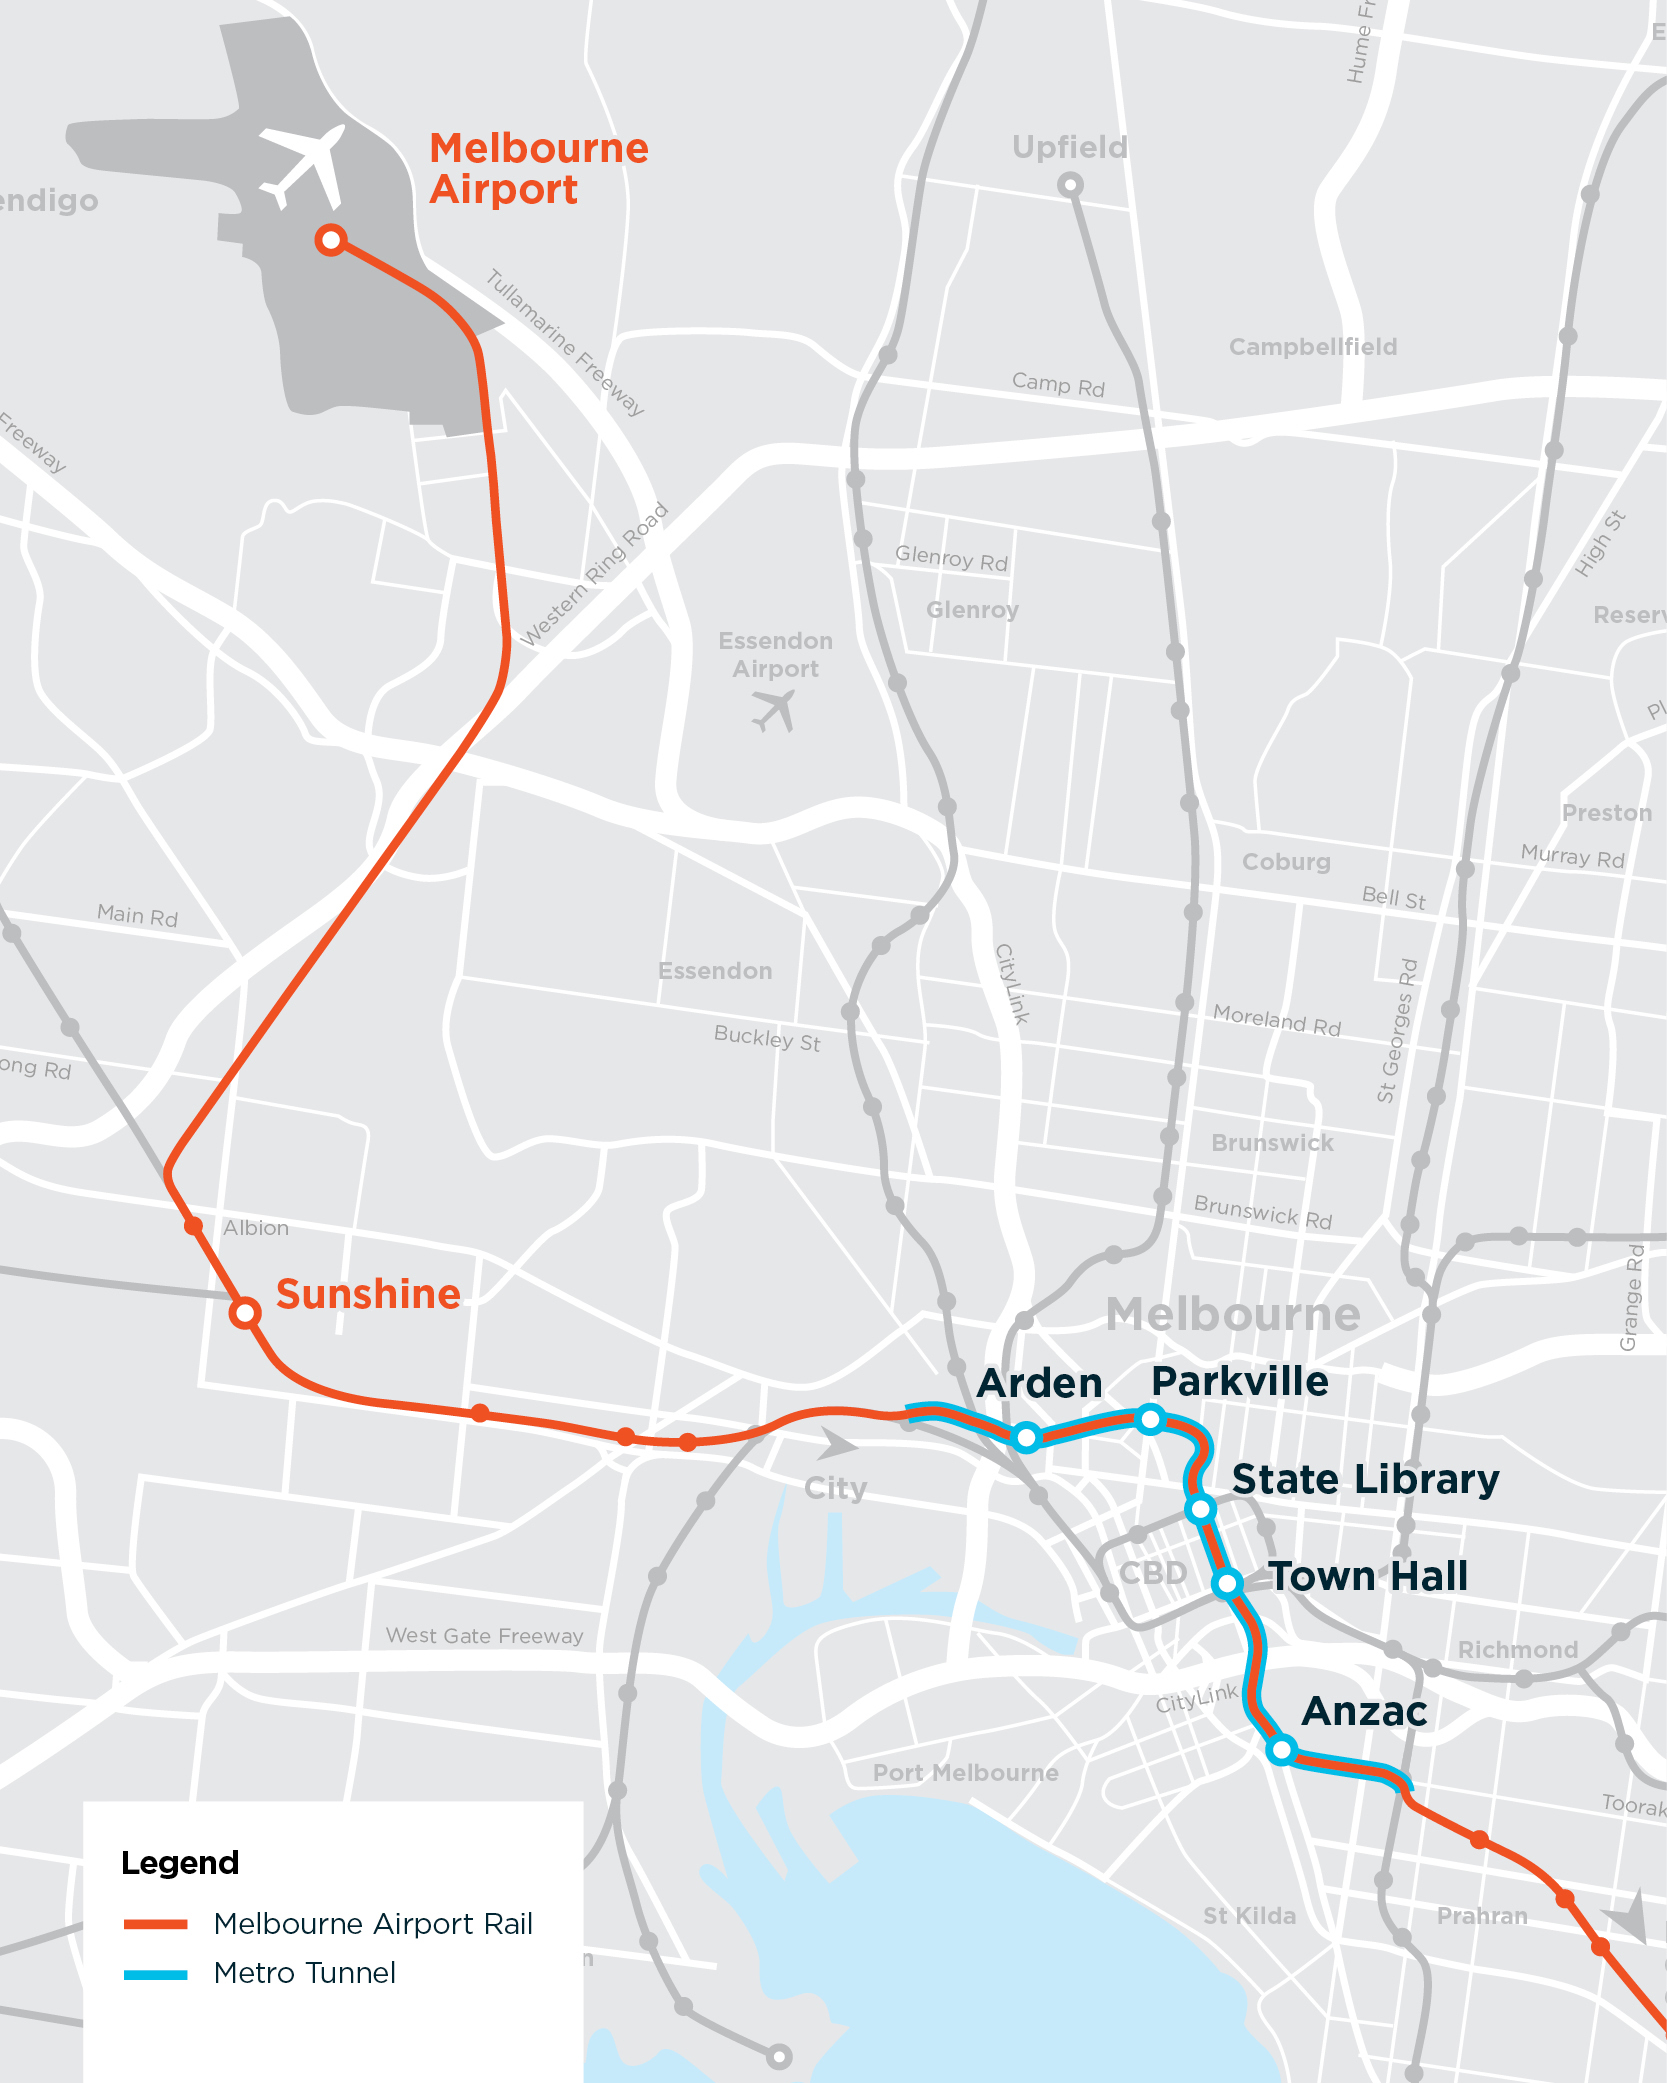 Map of Melbourne Airport Rail route, described above